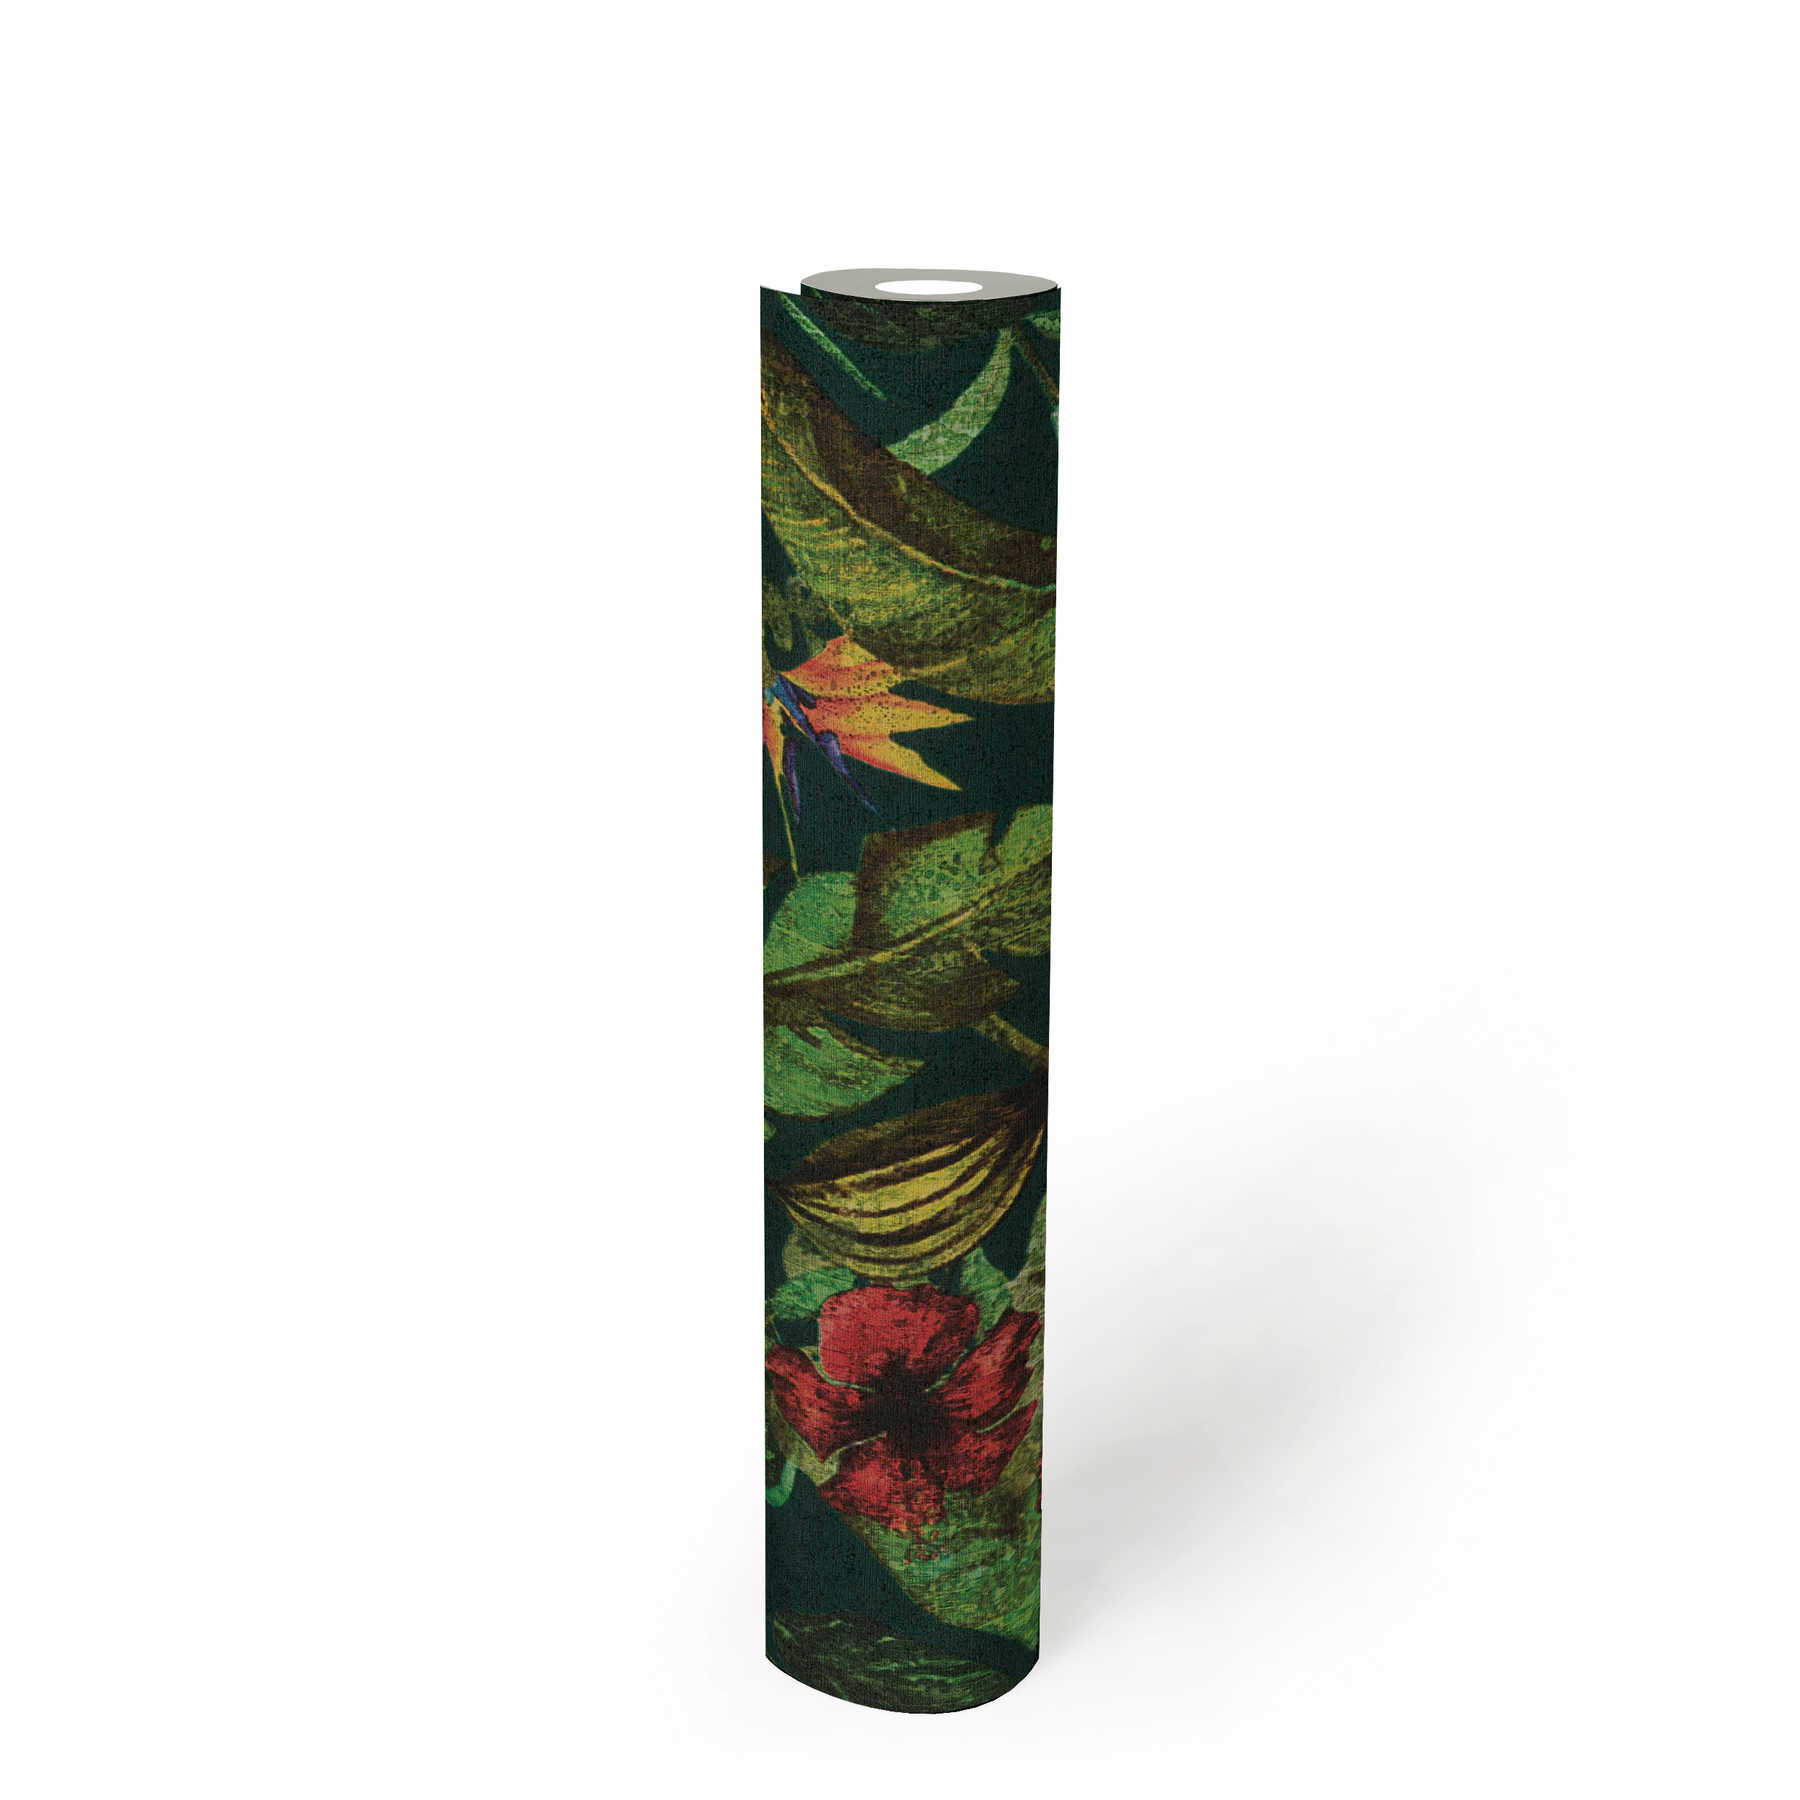             Jungle wallpaper tropical flowers - green, red, yellow
        